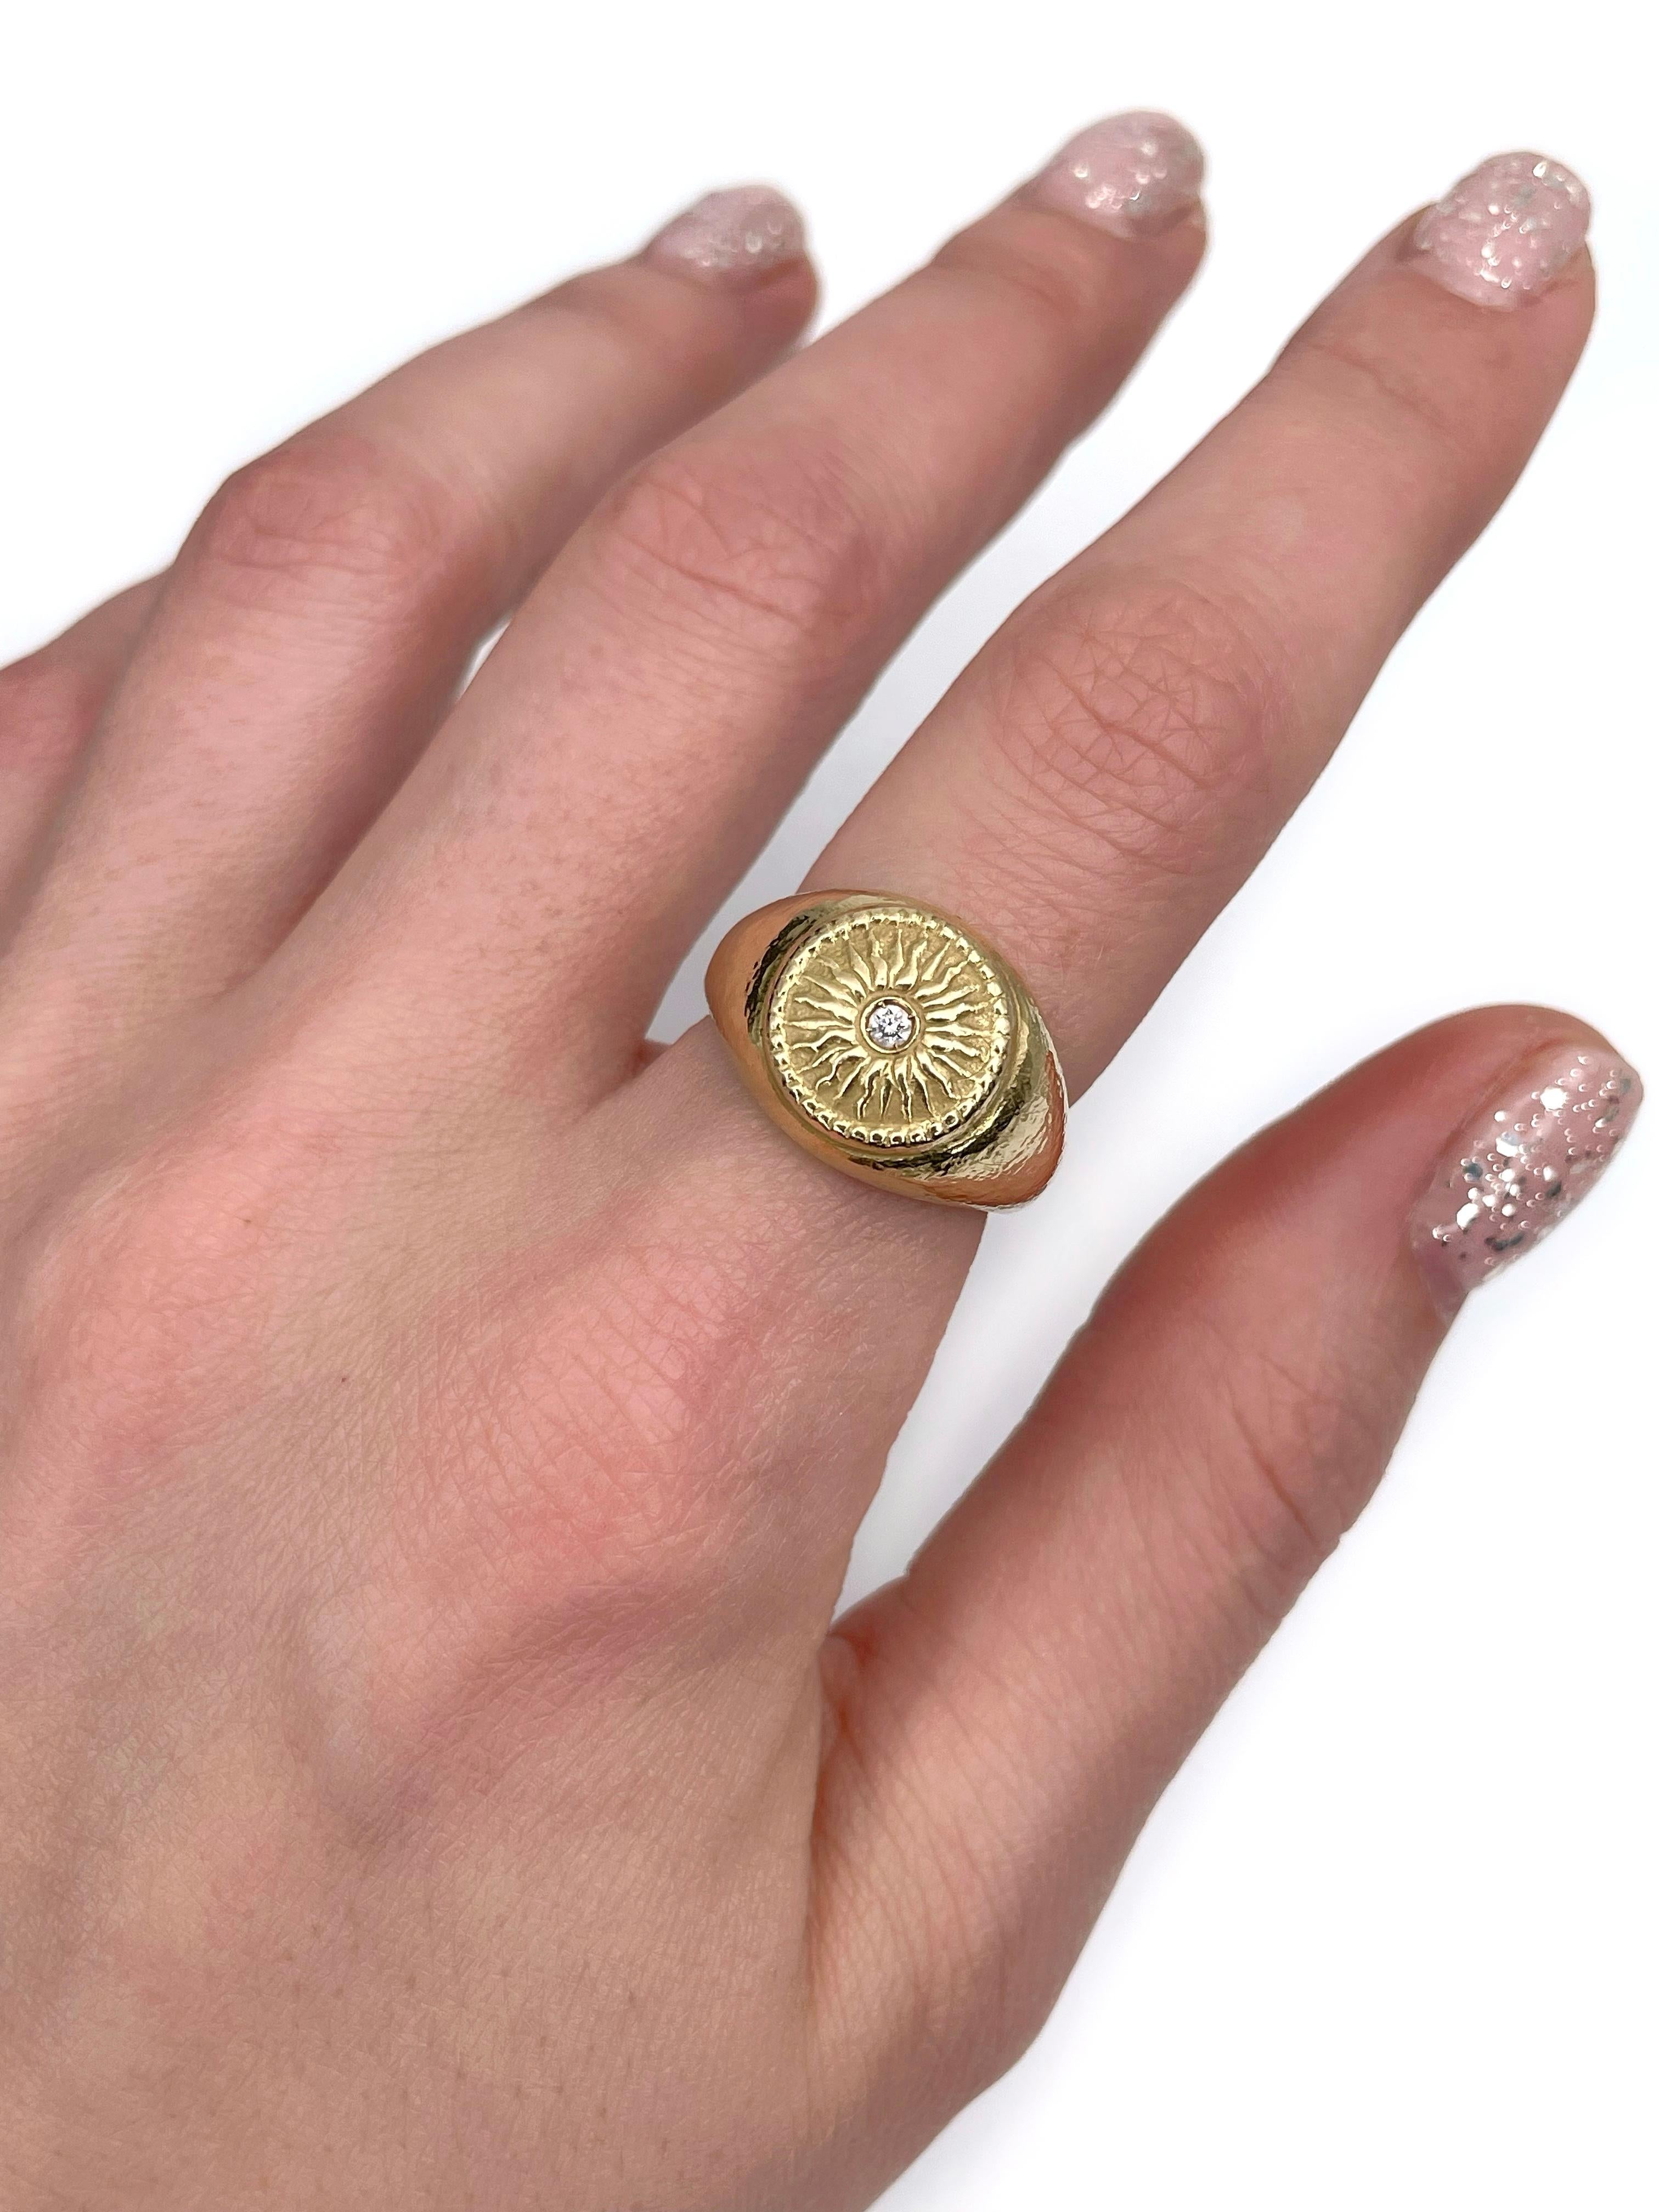 This is a vintage sun motif signet ring crafted in 18K yellow gold. The piece features brilliant cut diamond in the centre (0.03ct, RW+/RW, SI). The surface is patterned. 

Circa 1980

Weight: 9.68g
Size: 16.75 (US6.25)

IMPORTANT: please ask about